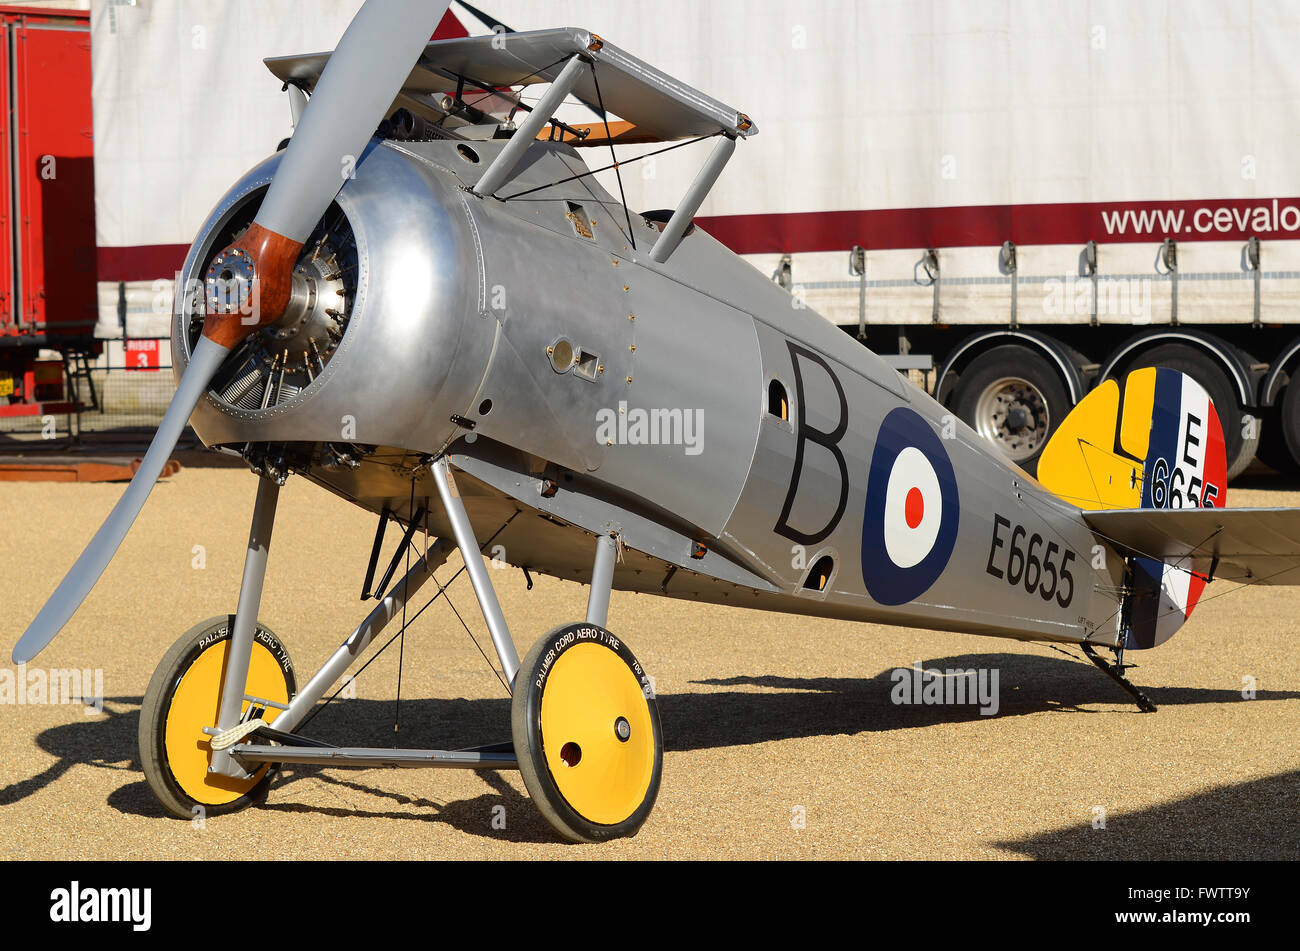 For the 98th anniversary of the Royal Air Force three aircraft from the RAF Museum were displayed in Horse Guards Parade, London, UK. Sopwith Snipe Stock Photo